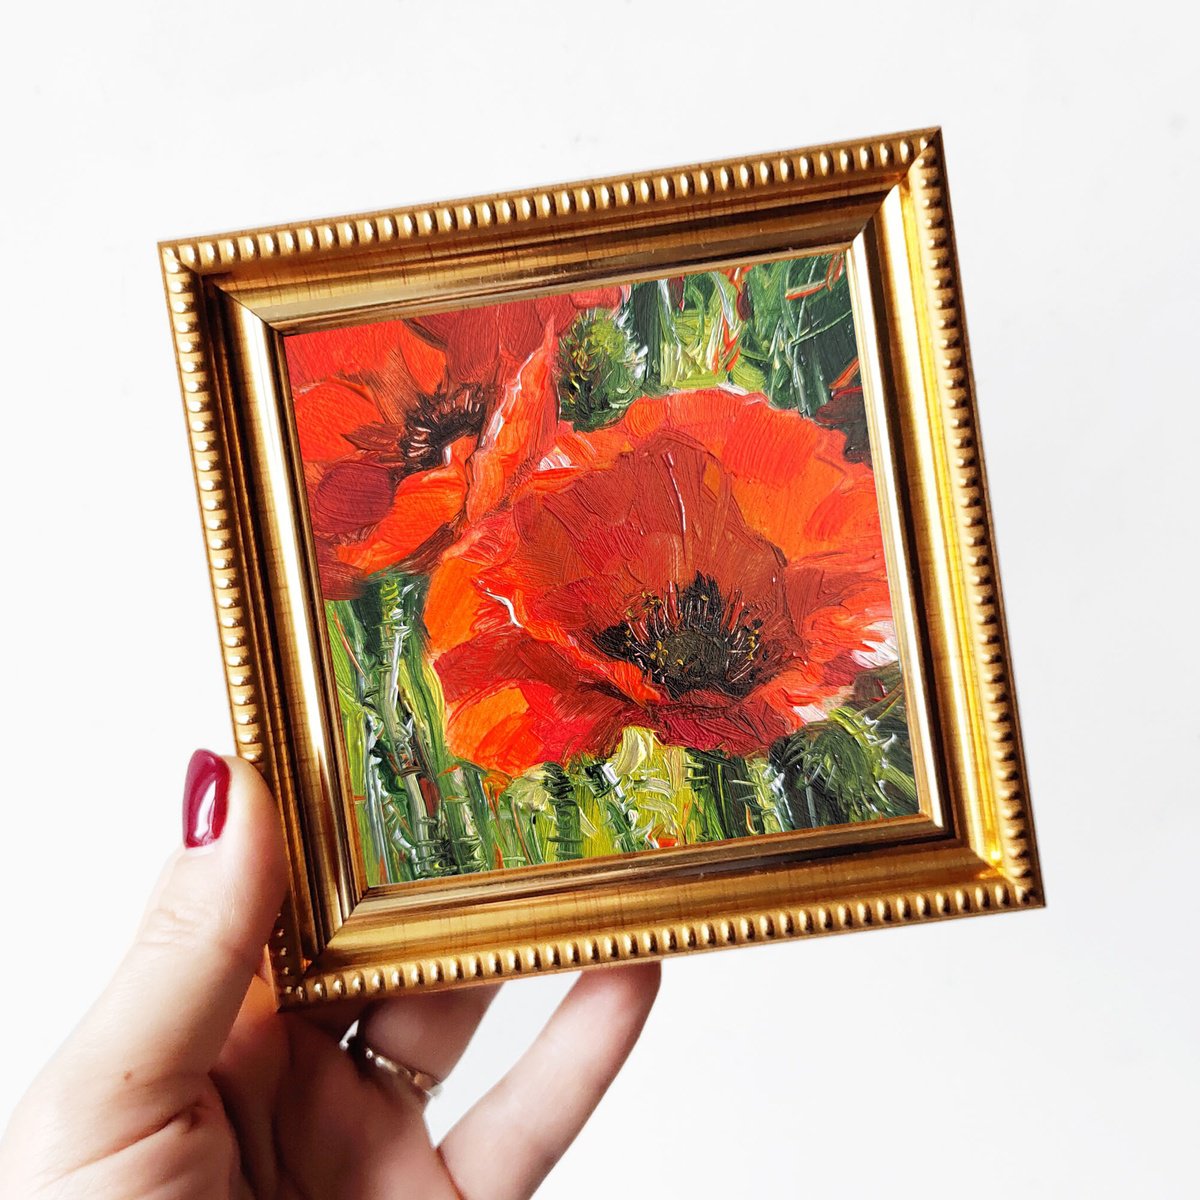 Poppy small painting original, Red flowers oil wall art 4x4 in frame by Nataly Derevyanko